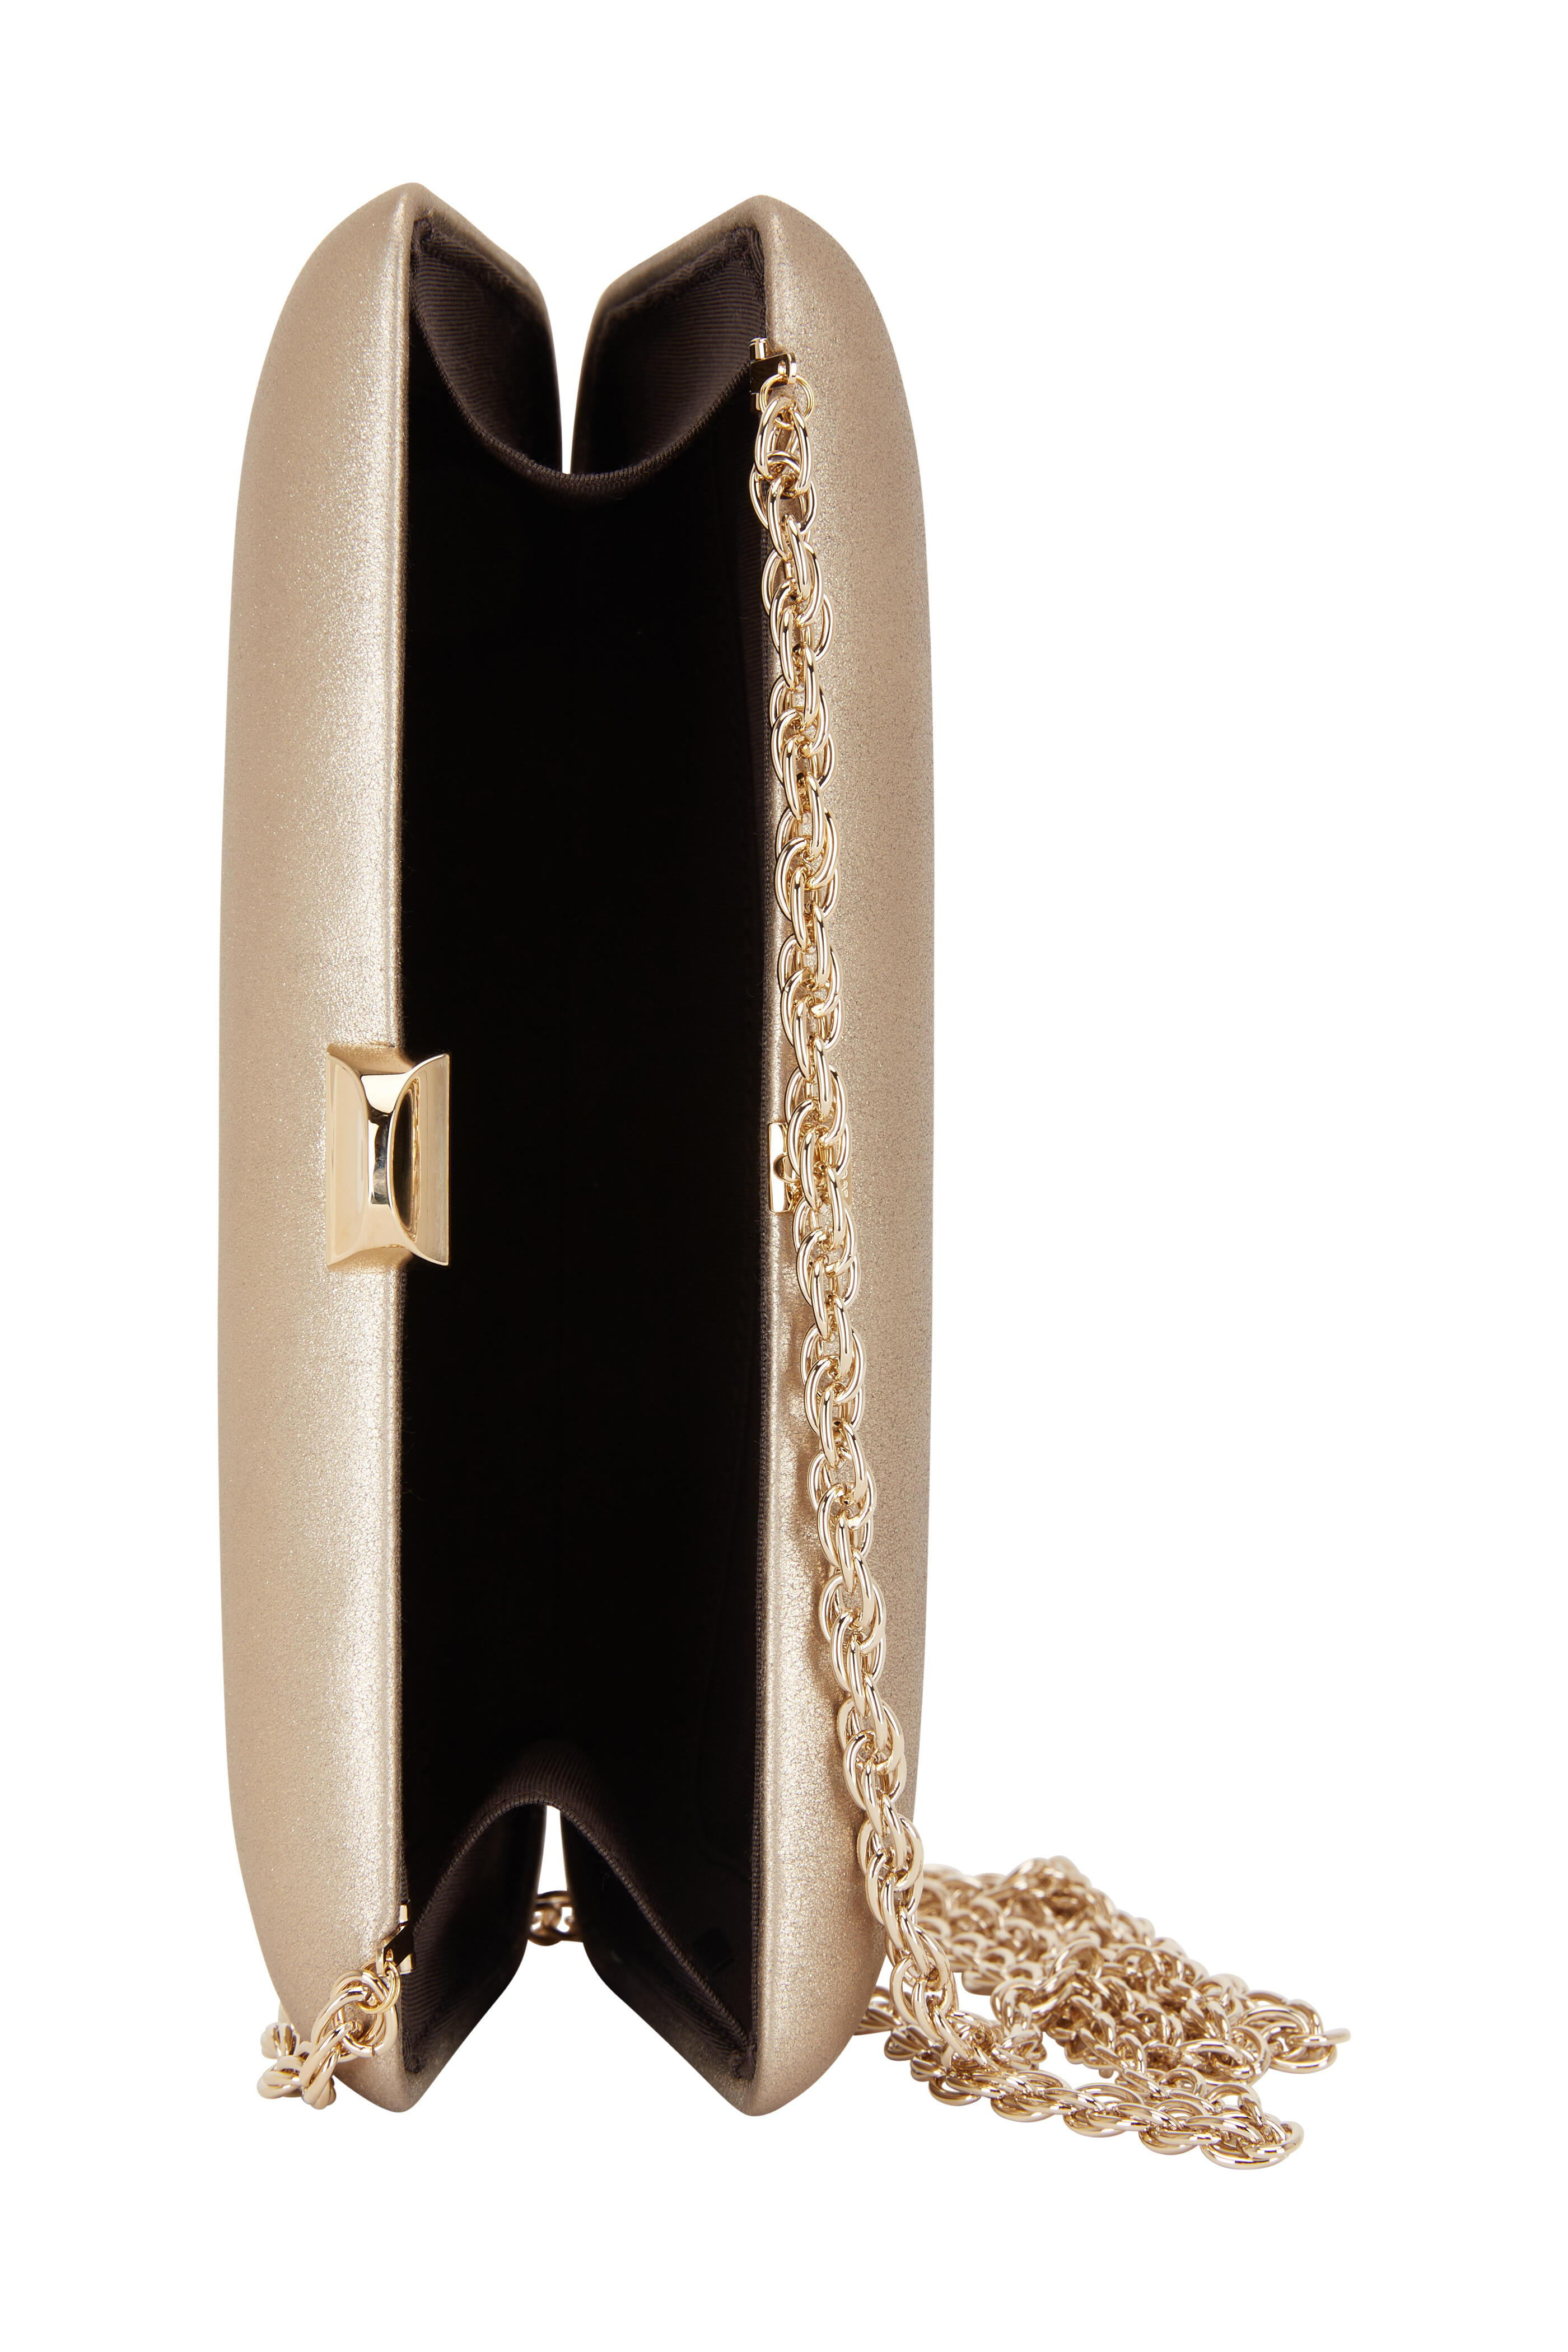 Christian Louboutin Lace Clutch with Gold Chain Strap in Nude and